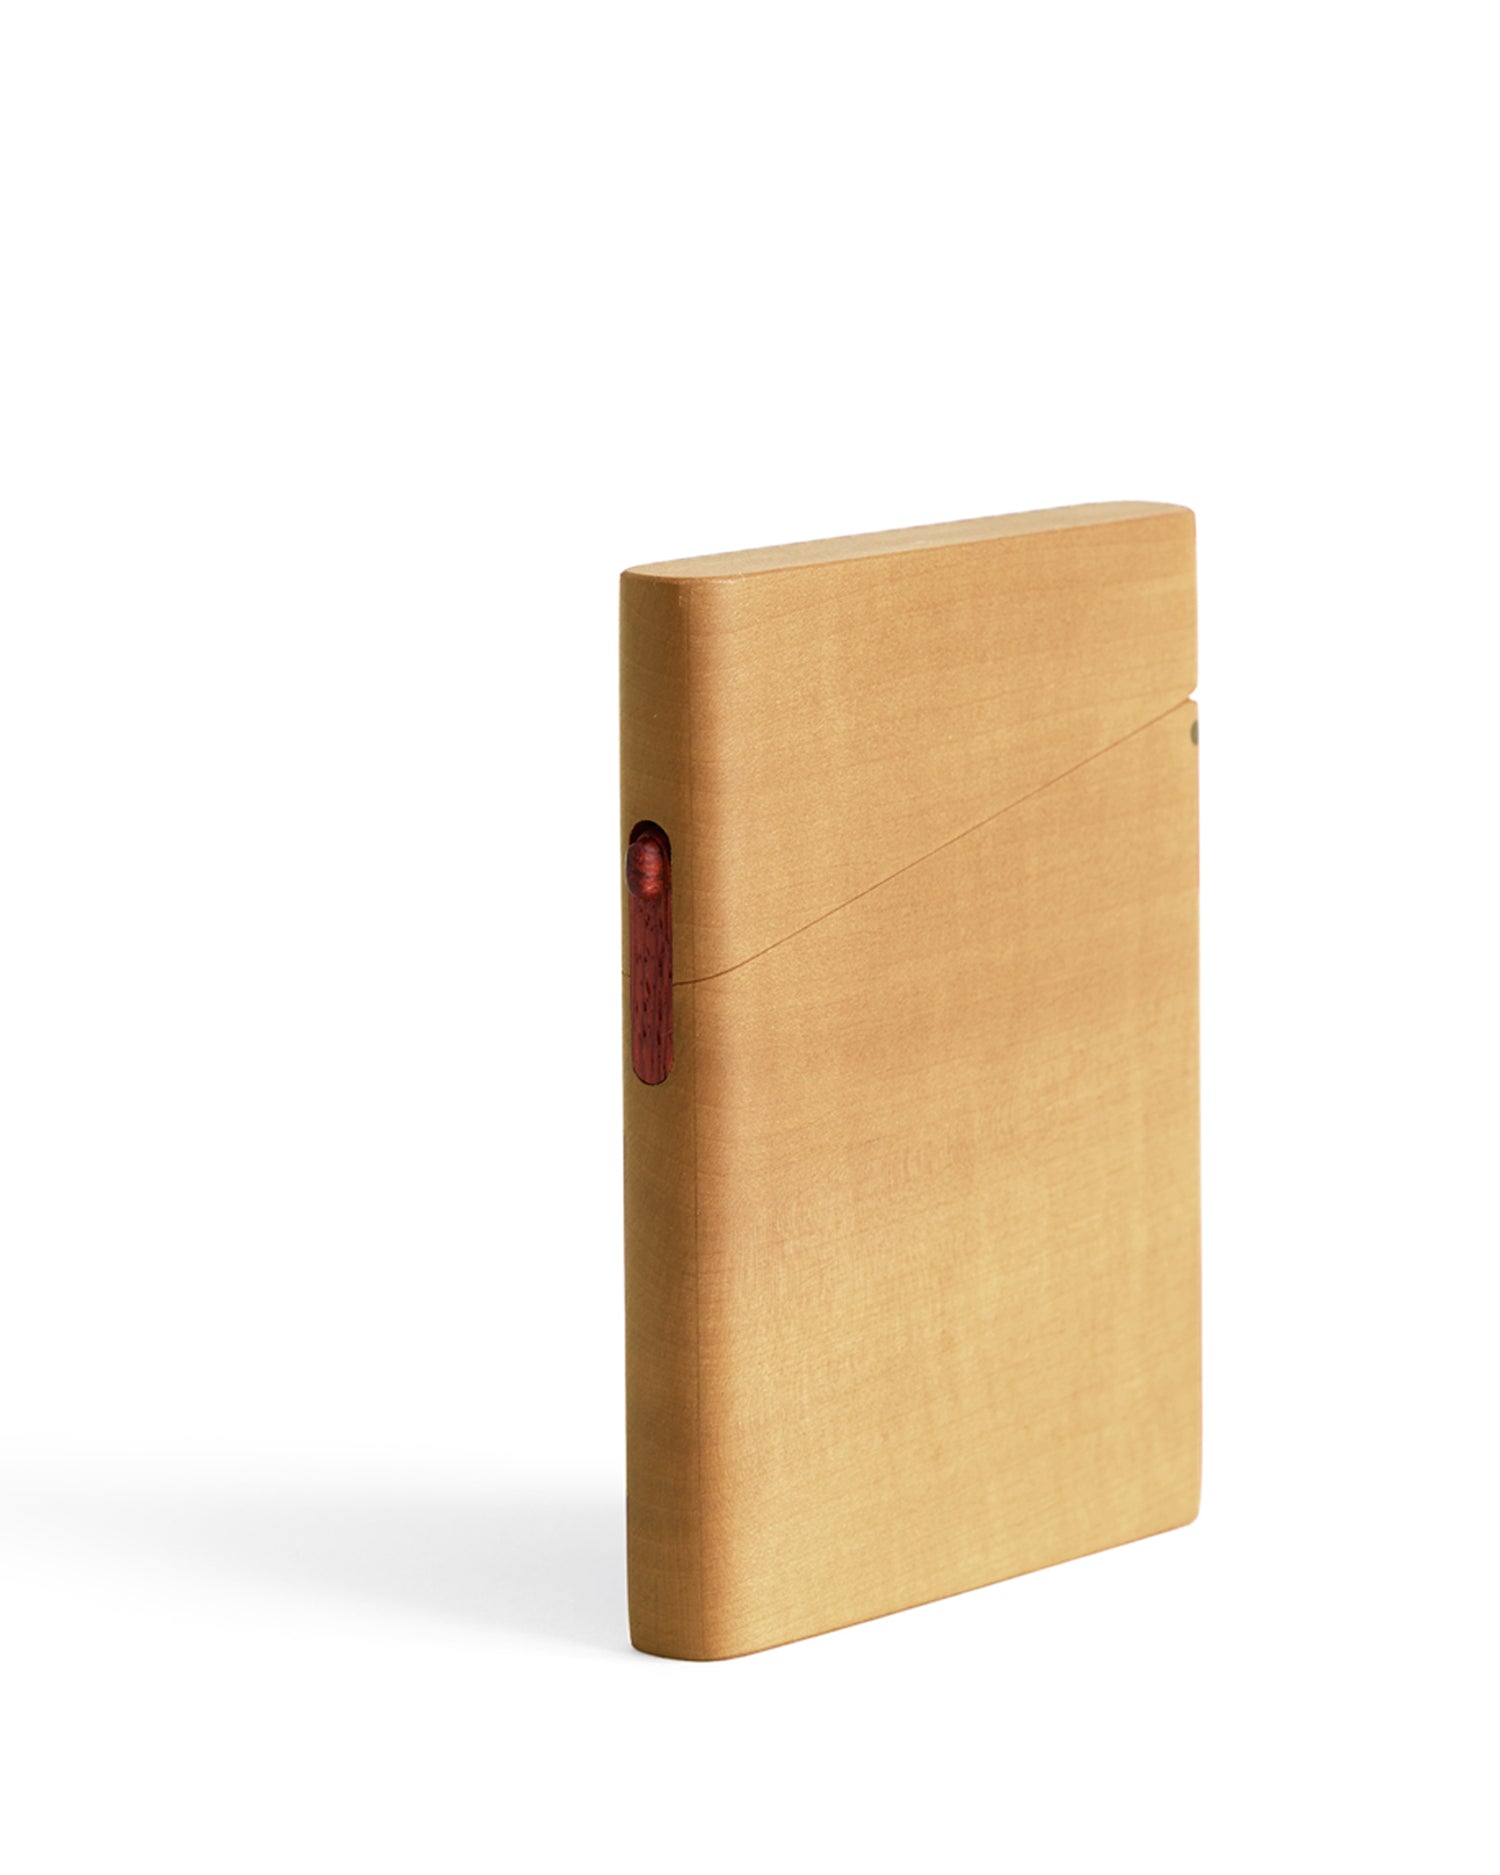 Silhouetted image of closed maple business card case by Norio Tanno against white background.